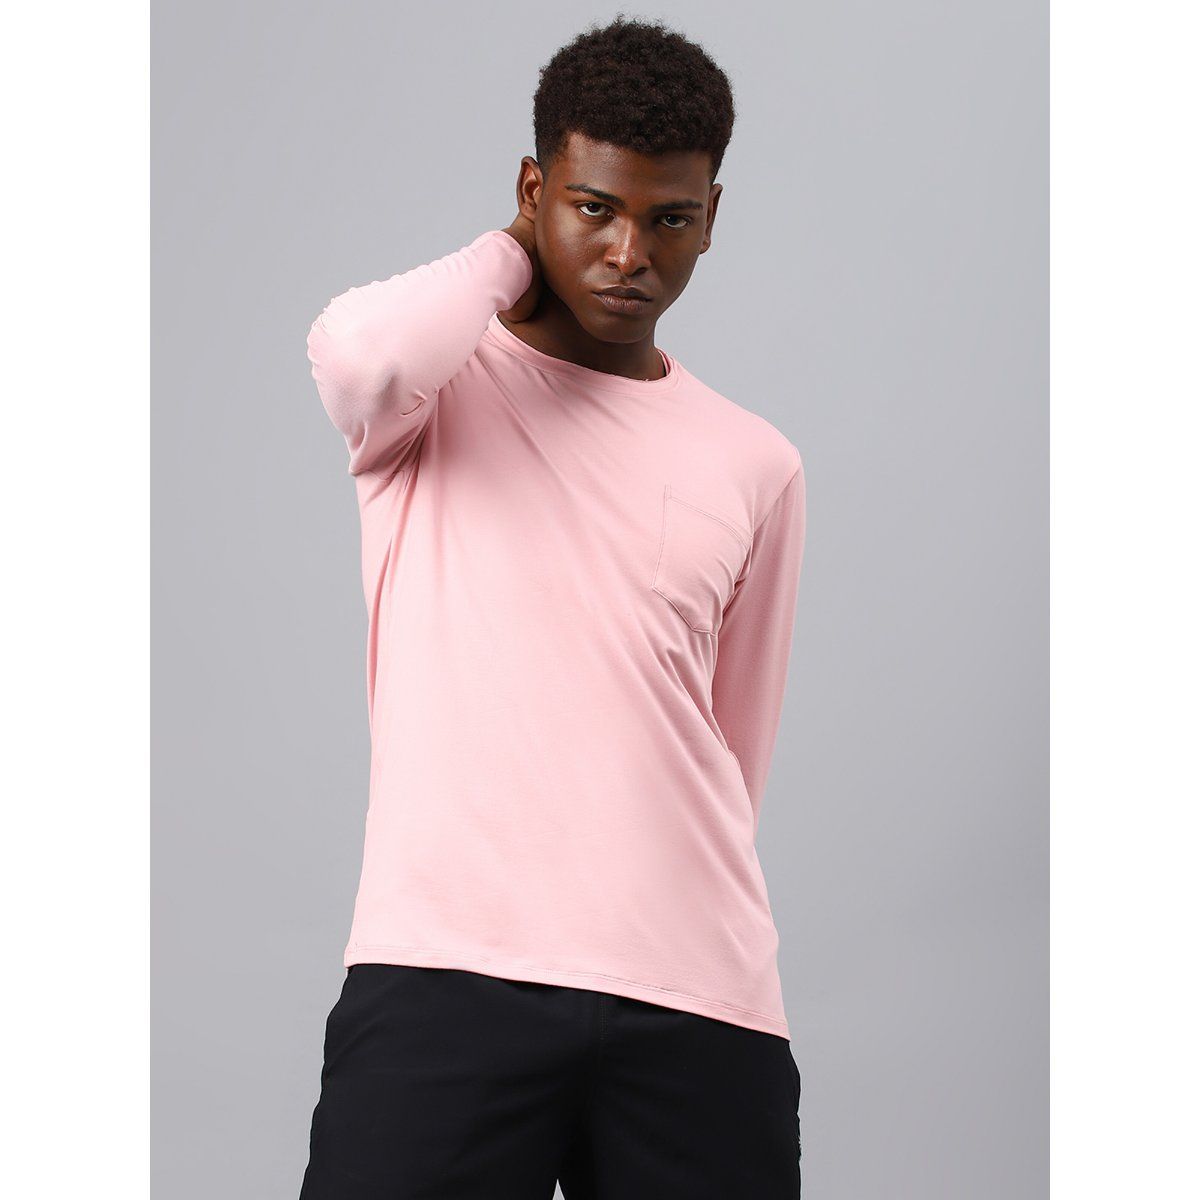 Fitkin Men Nude Pink Raw Edge Neck Style Long Sleeves T-Shirt (S)